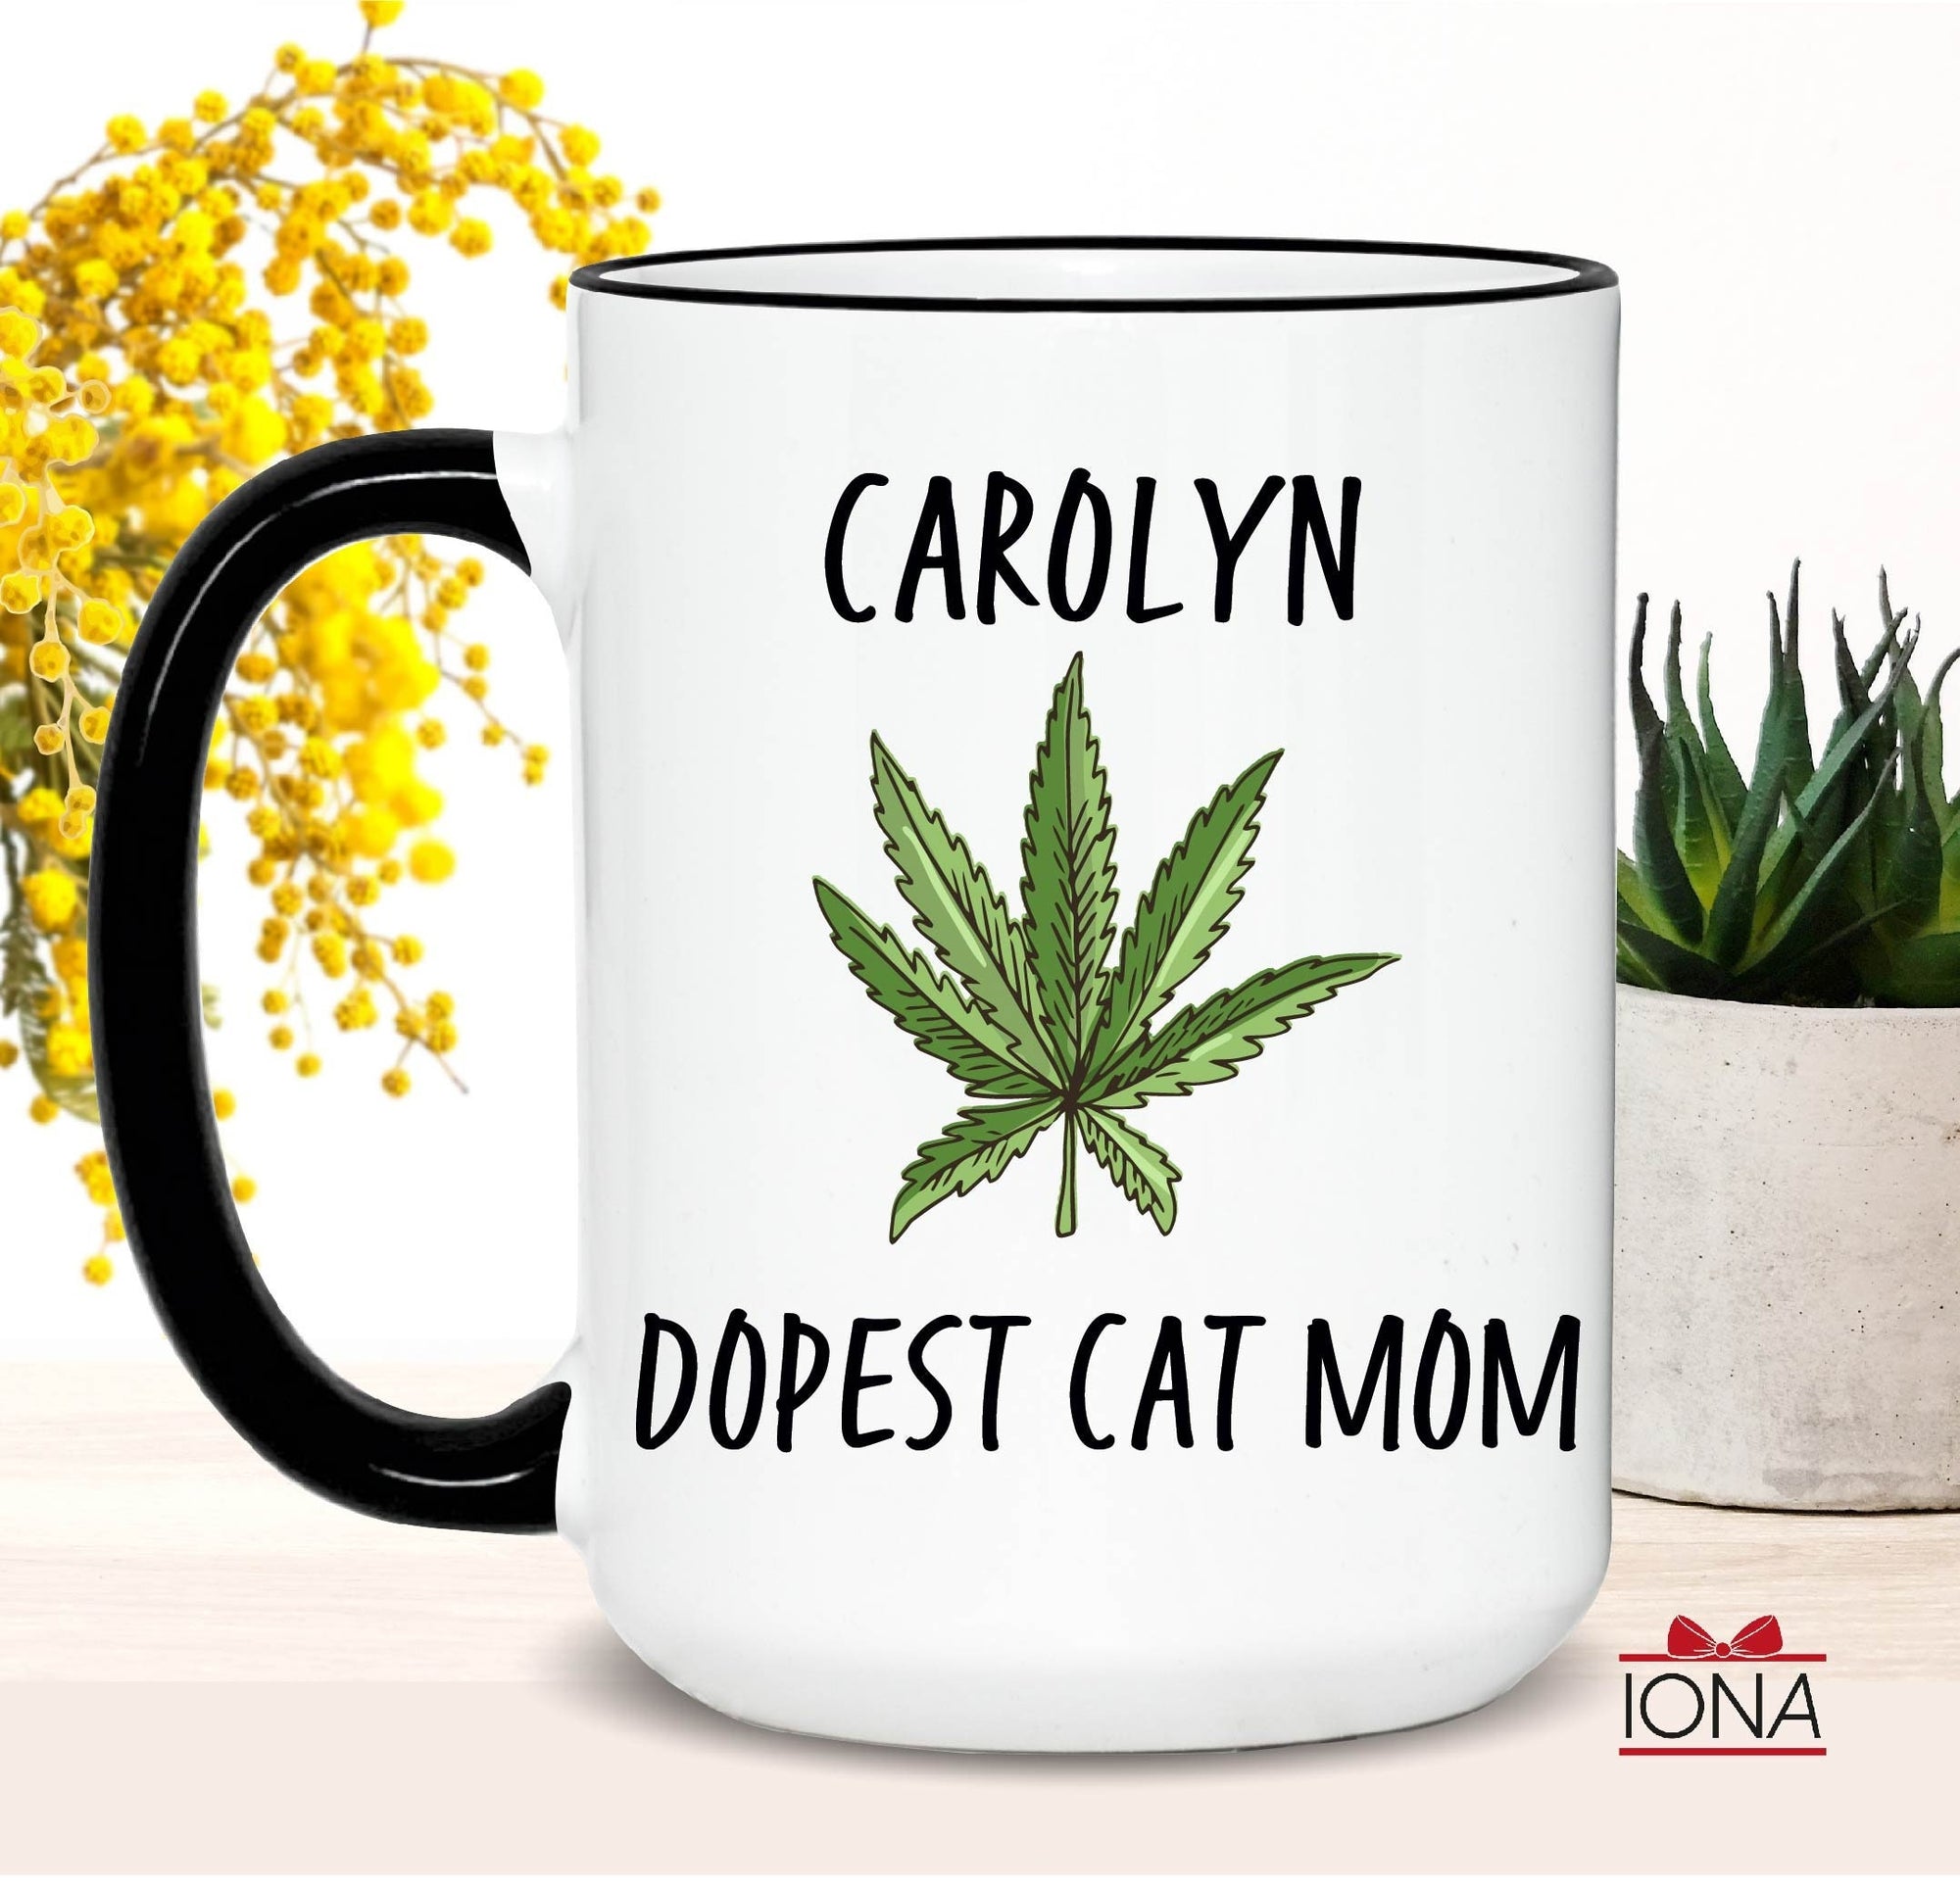 Dopest Cat Mom Coffee Mug, Personalized Cat Mom Birthday Gift, Funny Birthday Gift for Cat Mom, Cat Mom Tea Cup, Best Fucking Cat Mother